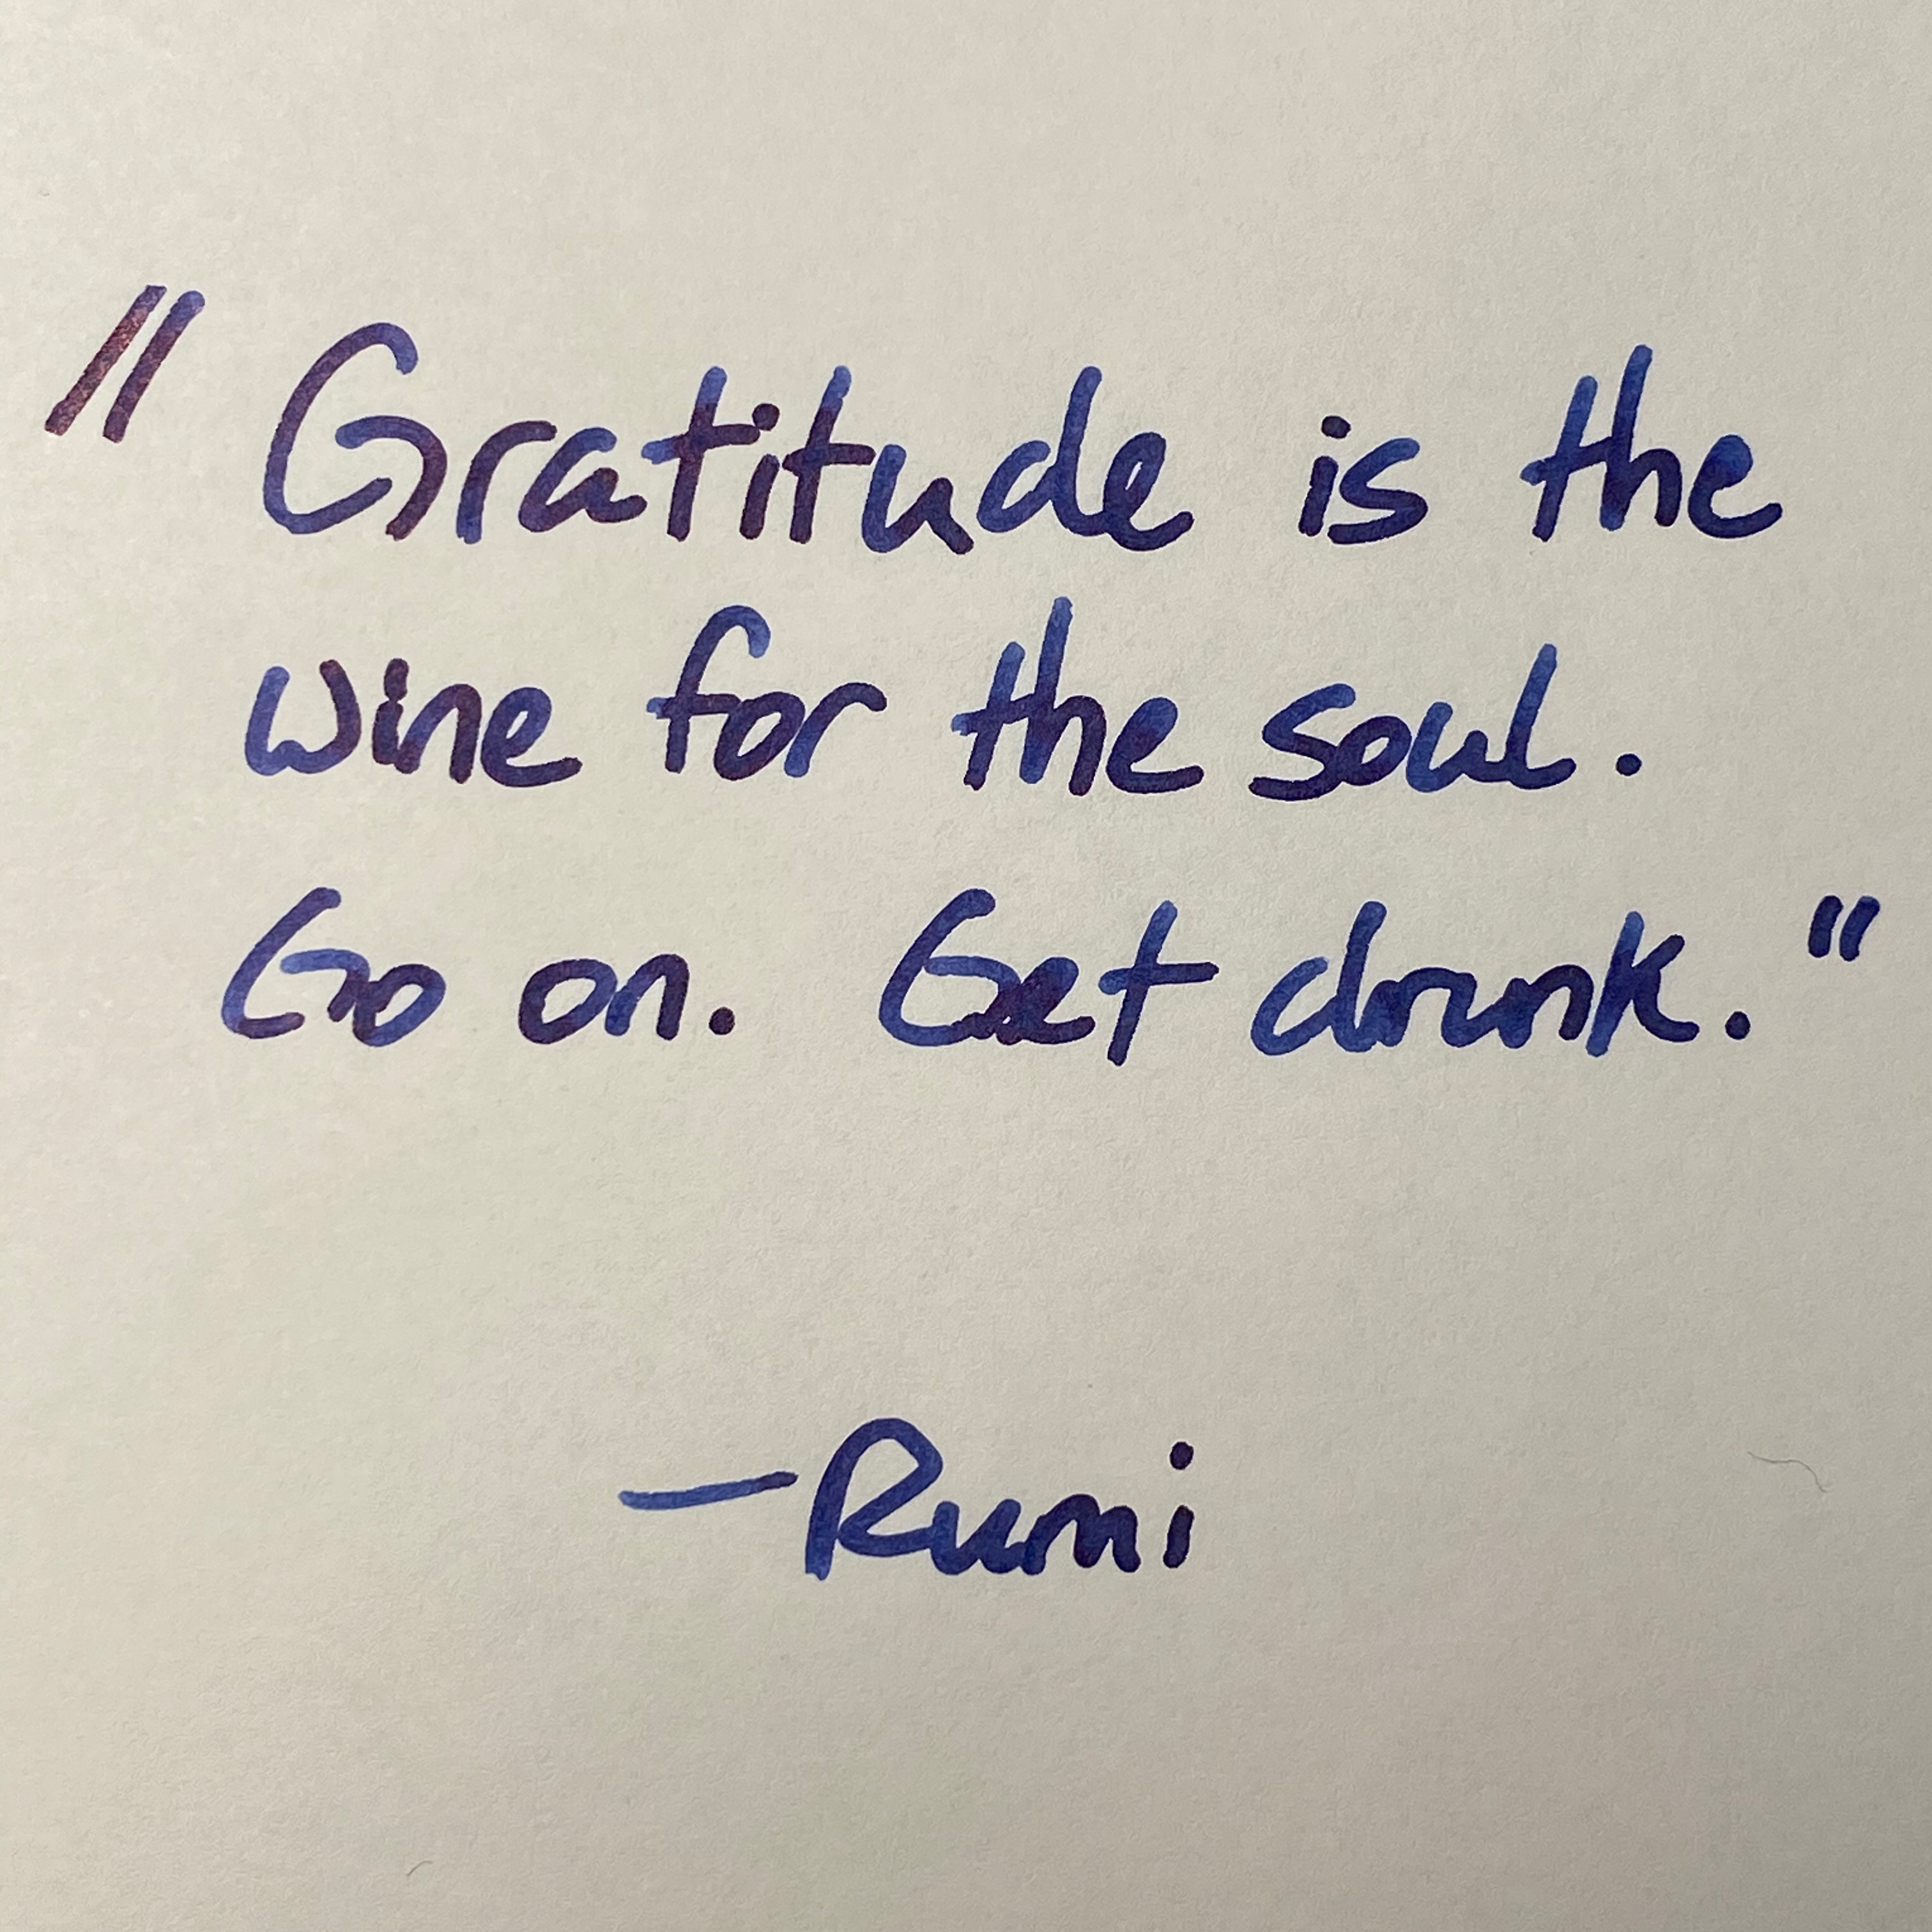 Handwritten note in blue ink by Rumi: Gratitude is the wine for the soul. Go on. Get drunk.